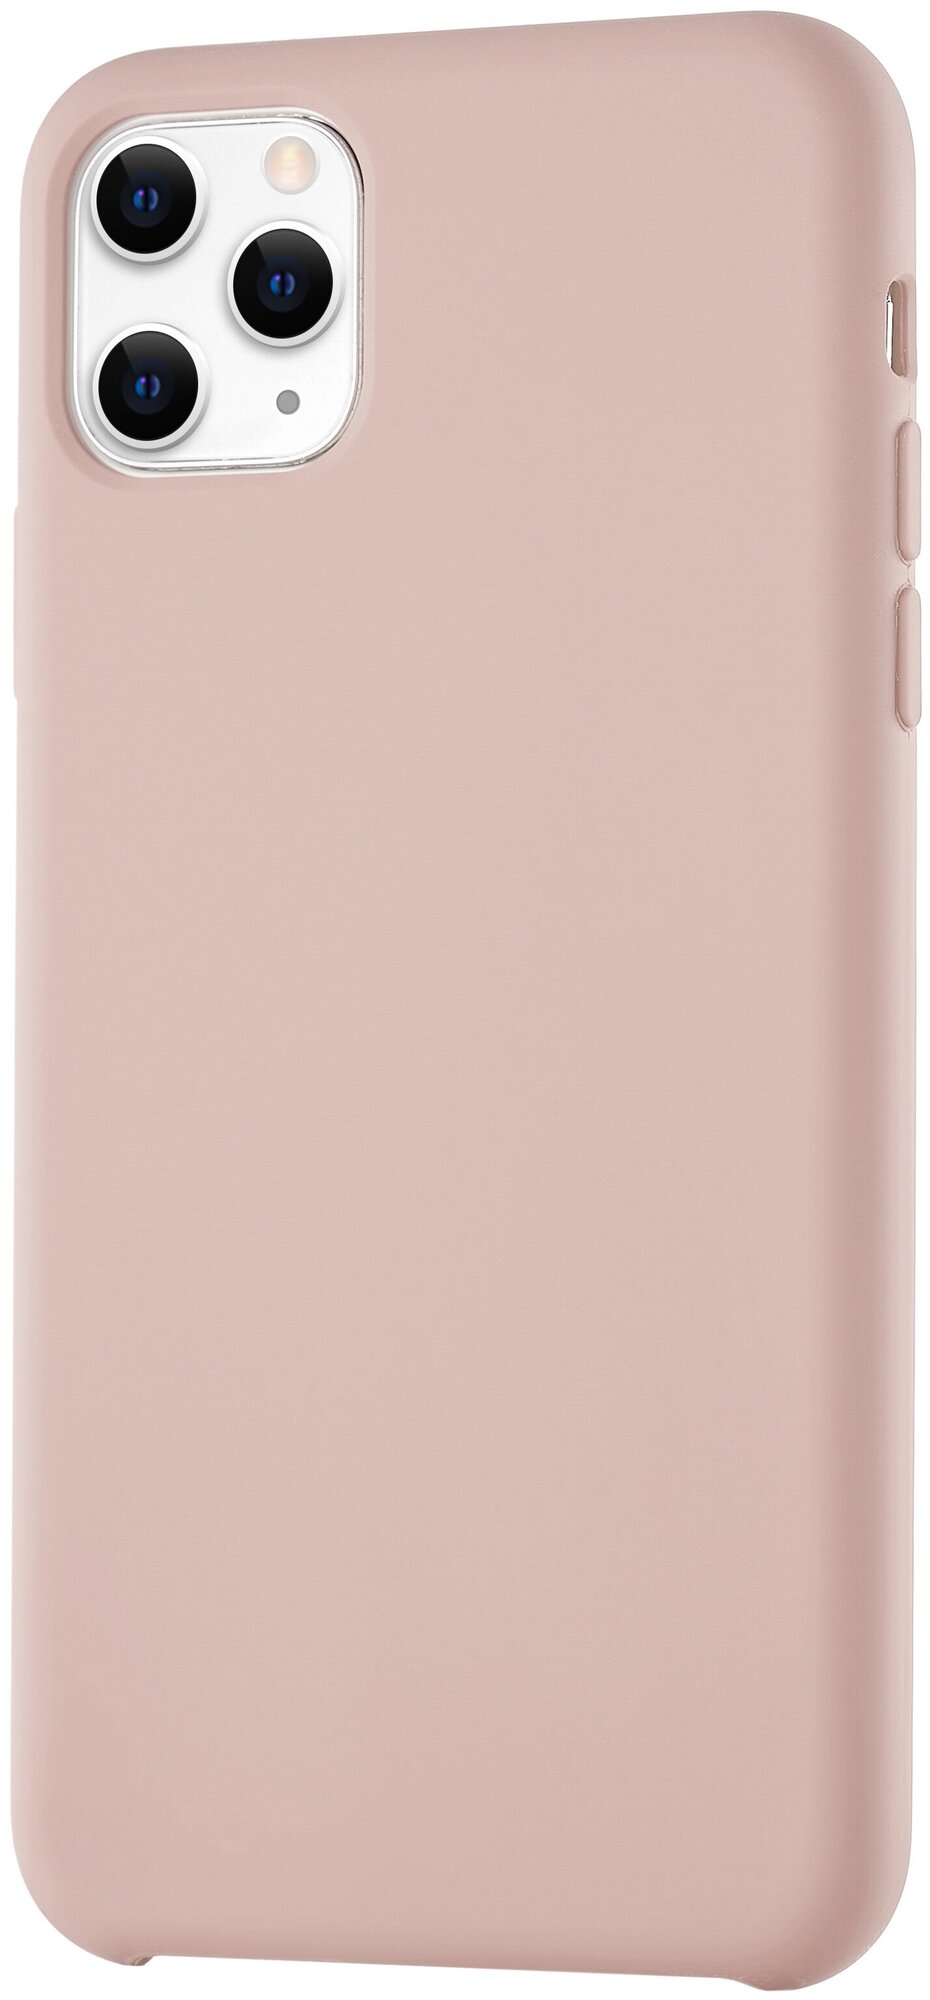 Чехол Touch Case for iPhone 11 Pro Max розовый (силикон soft touch)